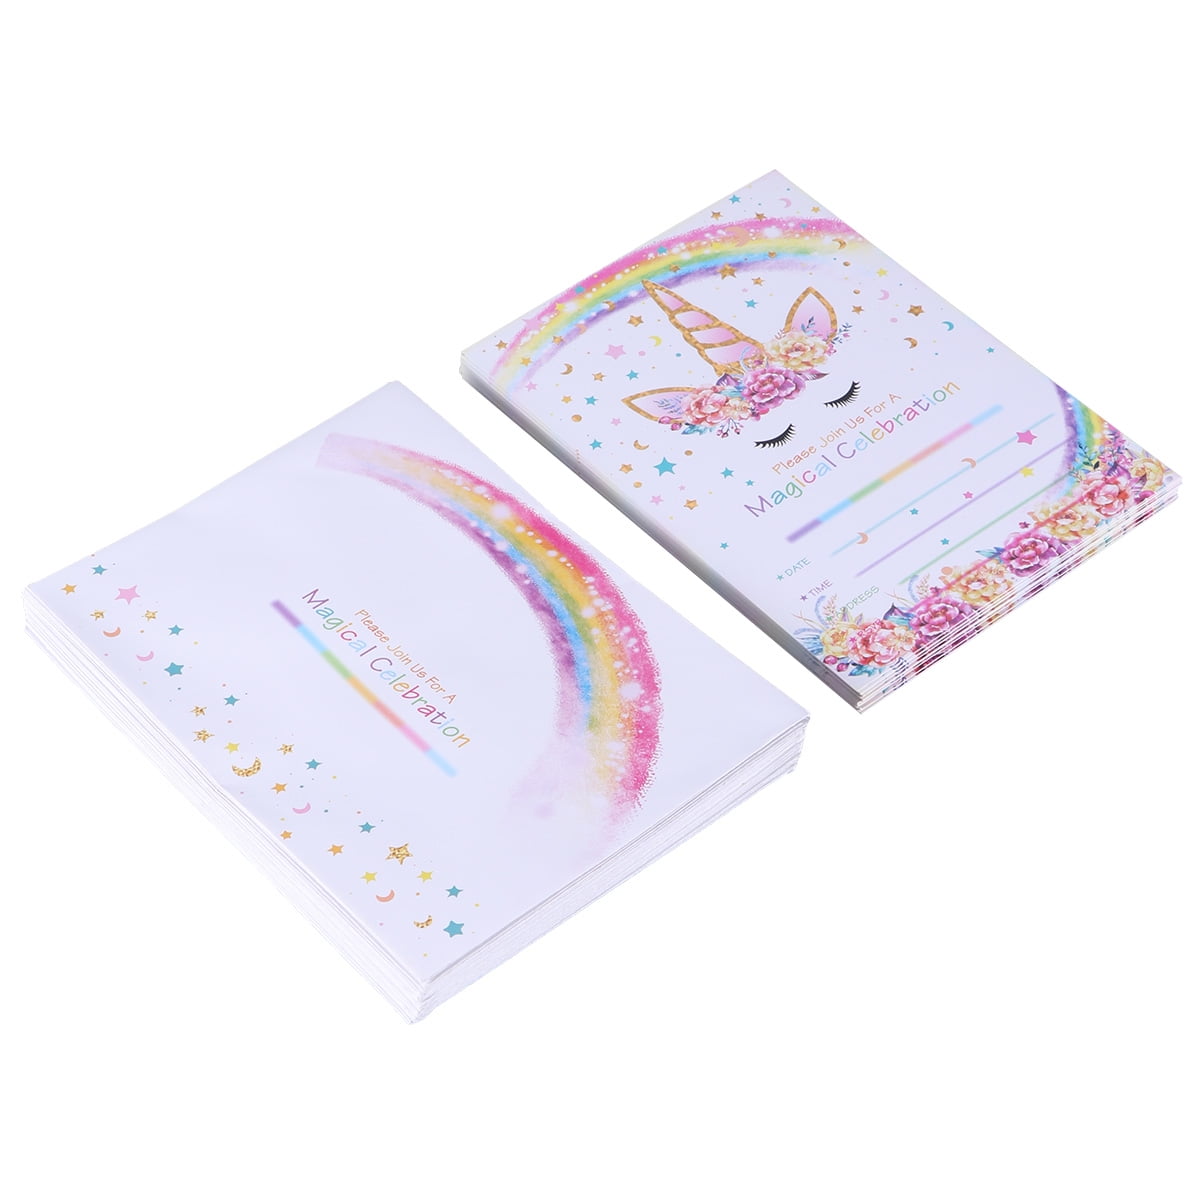 Magical Unicorn Party Invitations with Envelopes for Girls Kids Teen  Unicorn Birthday Party Unicorn Party Invites Supplies Fill in Blank Style  Sparkling Pink Faux Glitter Large 5x7 Set (25 Pack) - Walmart.com